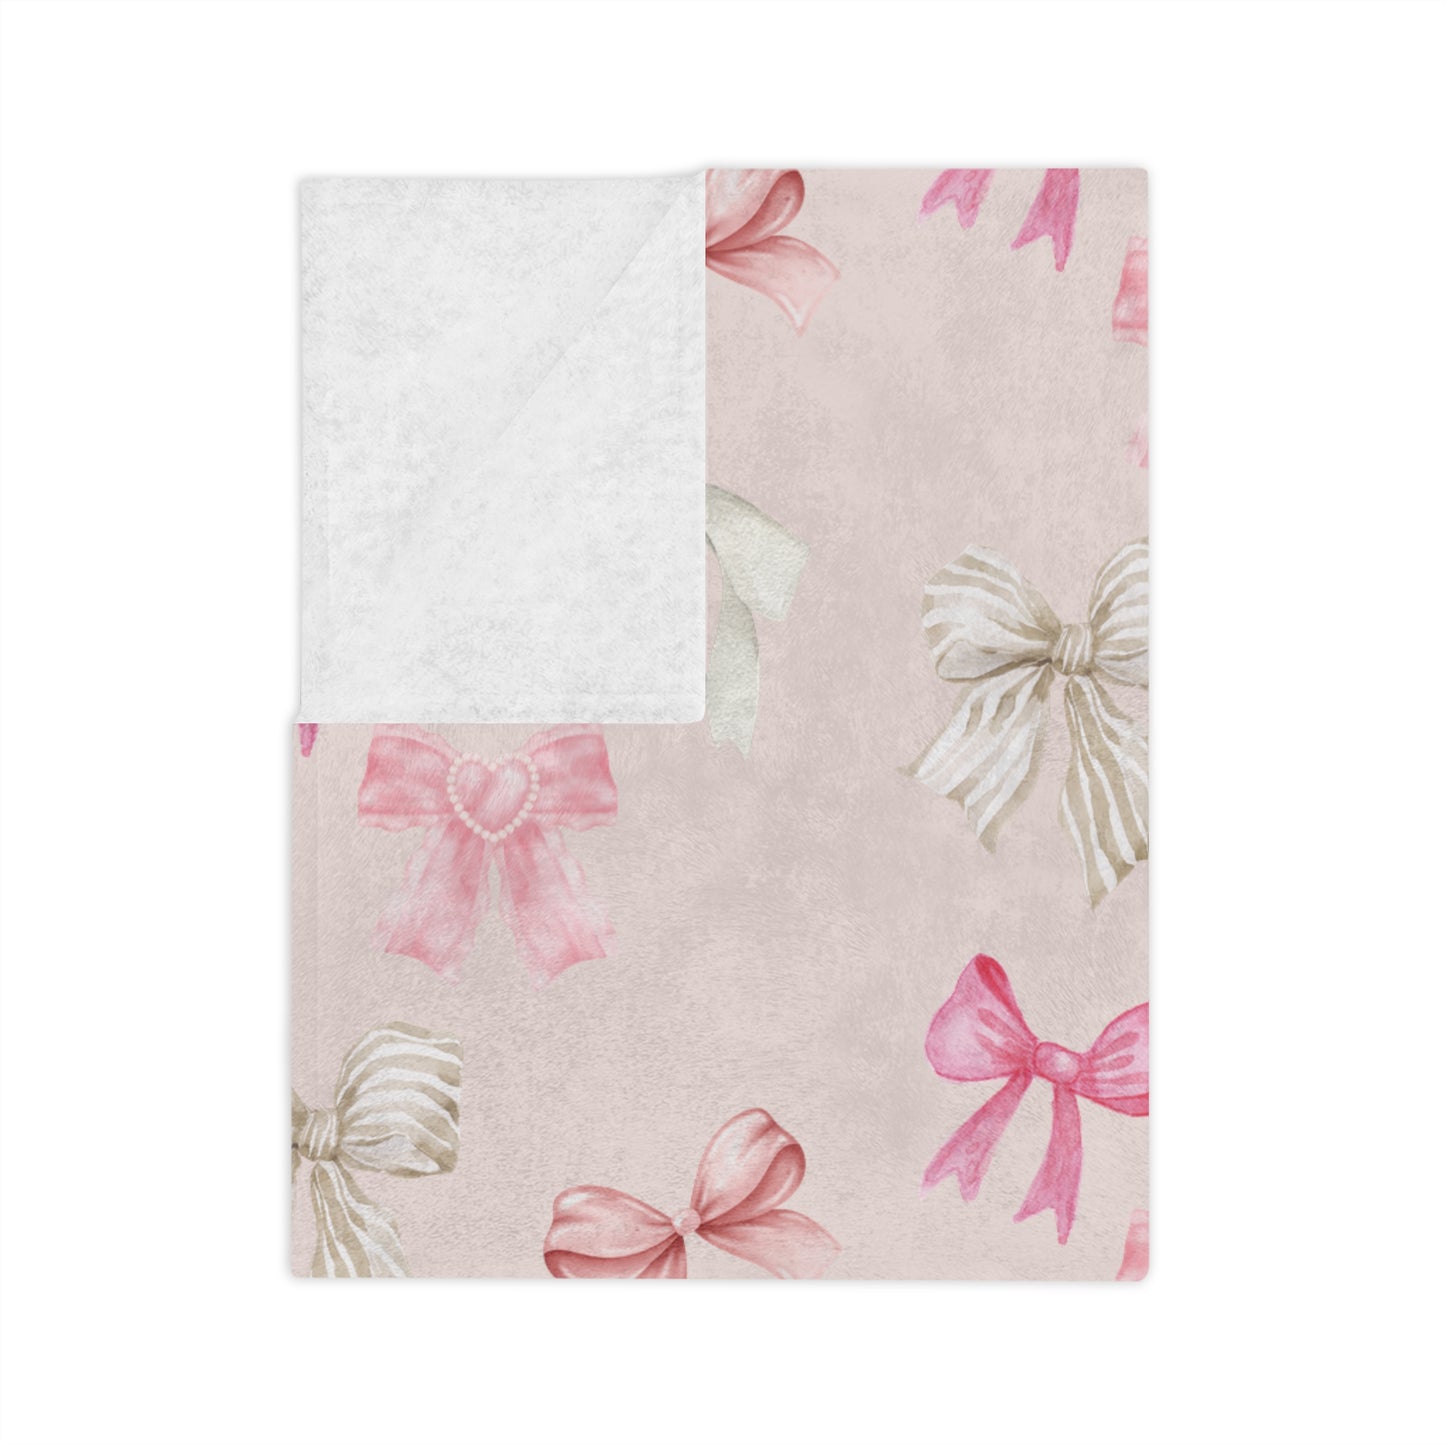 Coquette Pink & White Bow Microfiber Cozy Soft Blanket Multiple Sizes